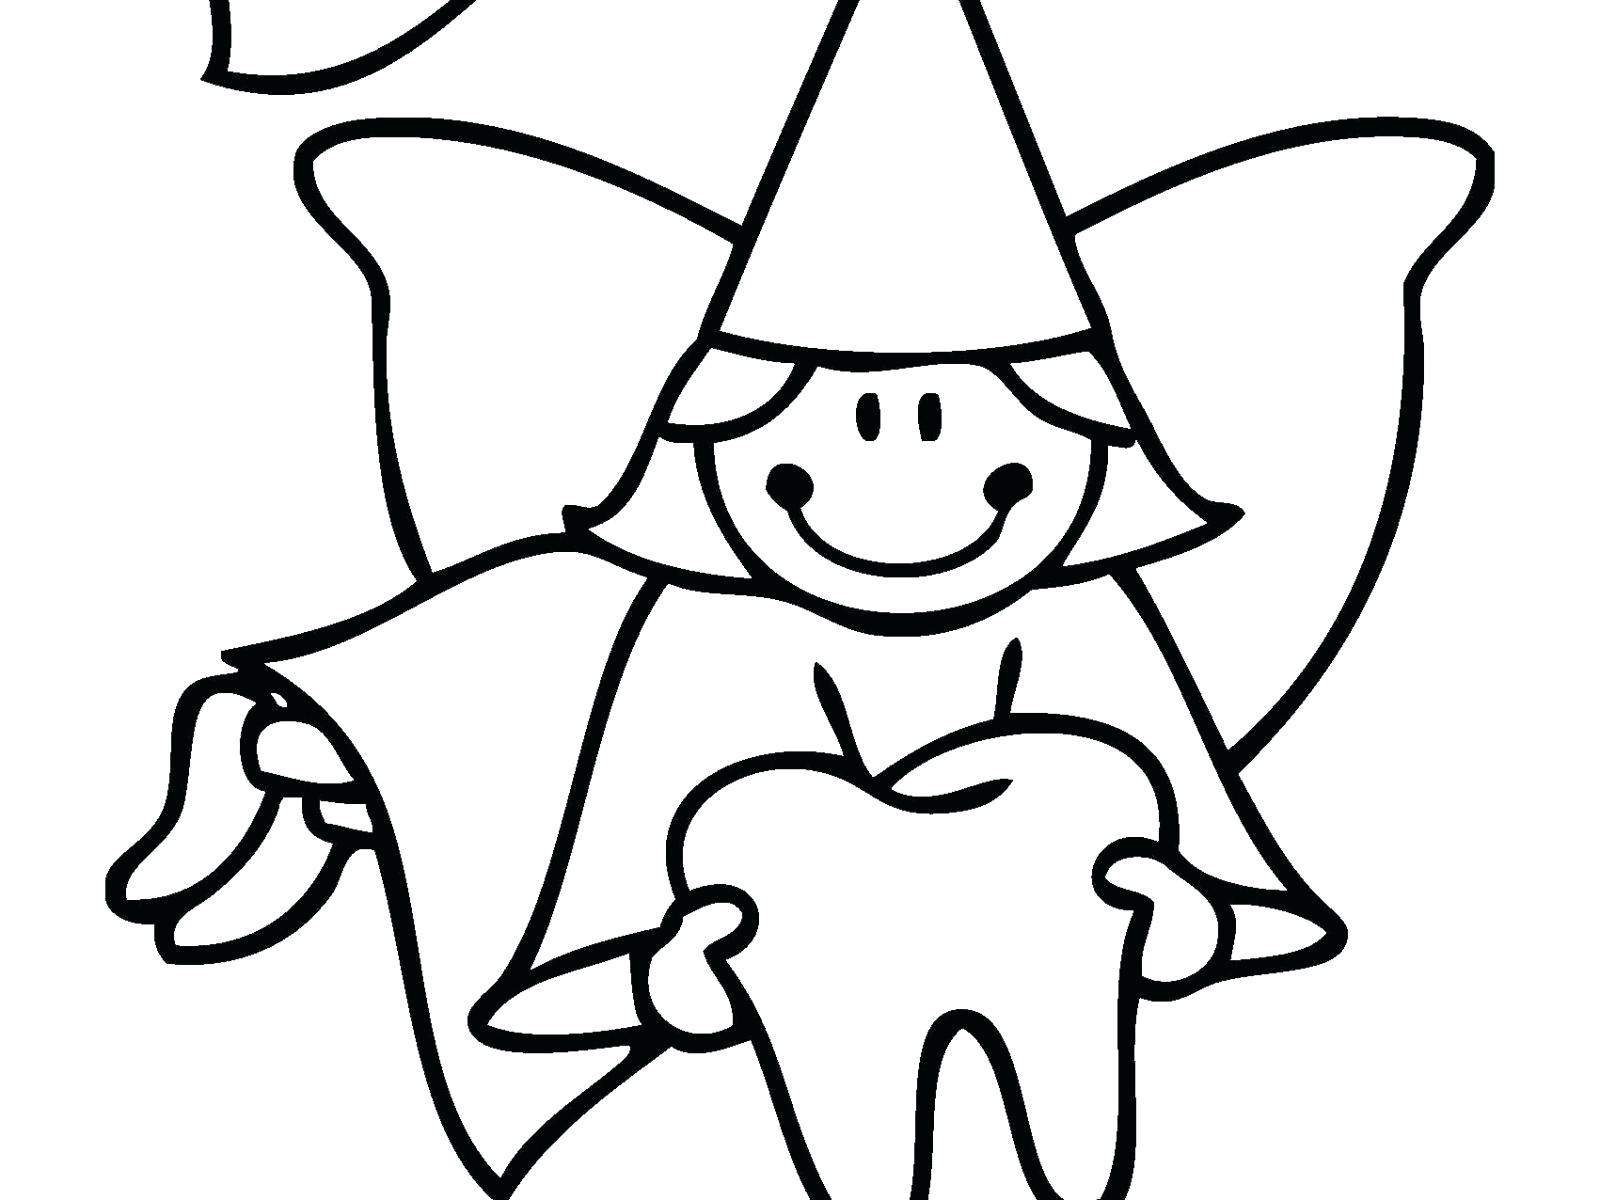 Shark Tooth Coloring Page at GetColorings.com | Free printable